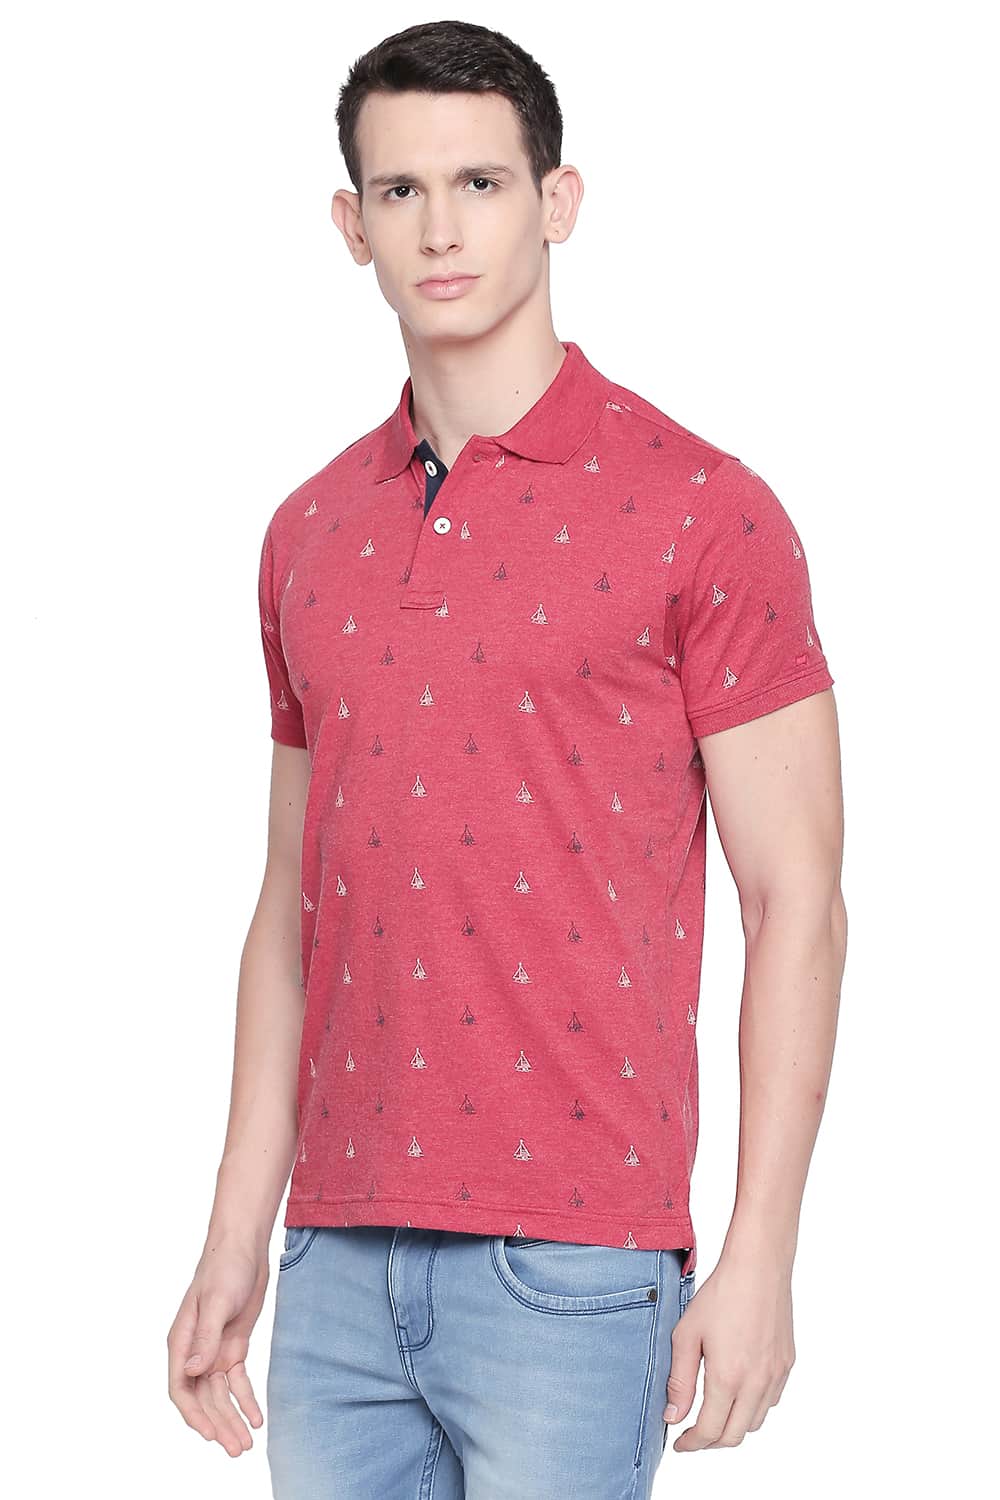 BASICS MUSCLE FIT PRINTED POLO T SHIRT